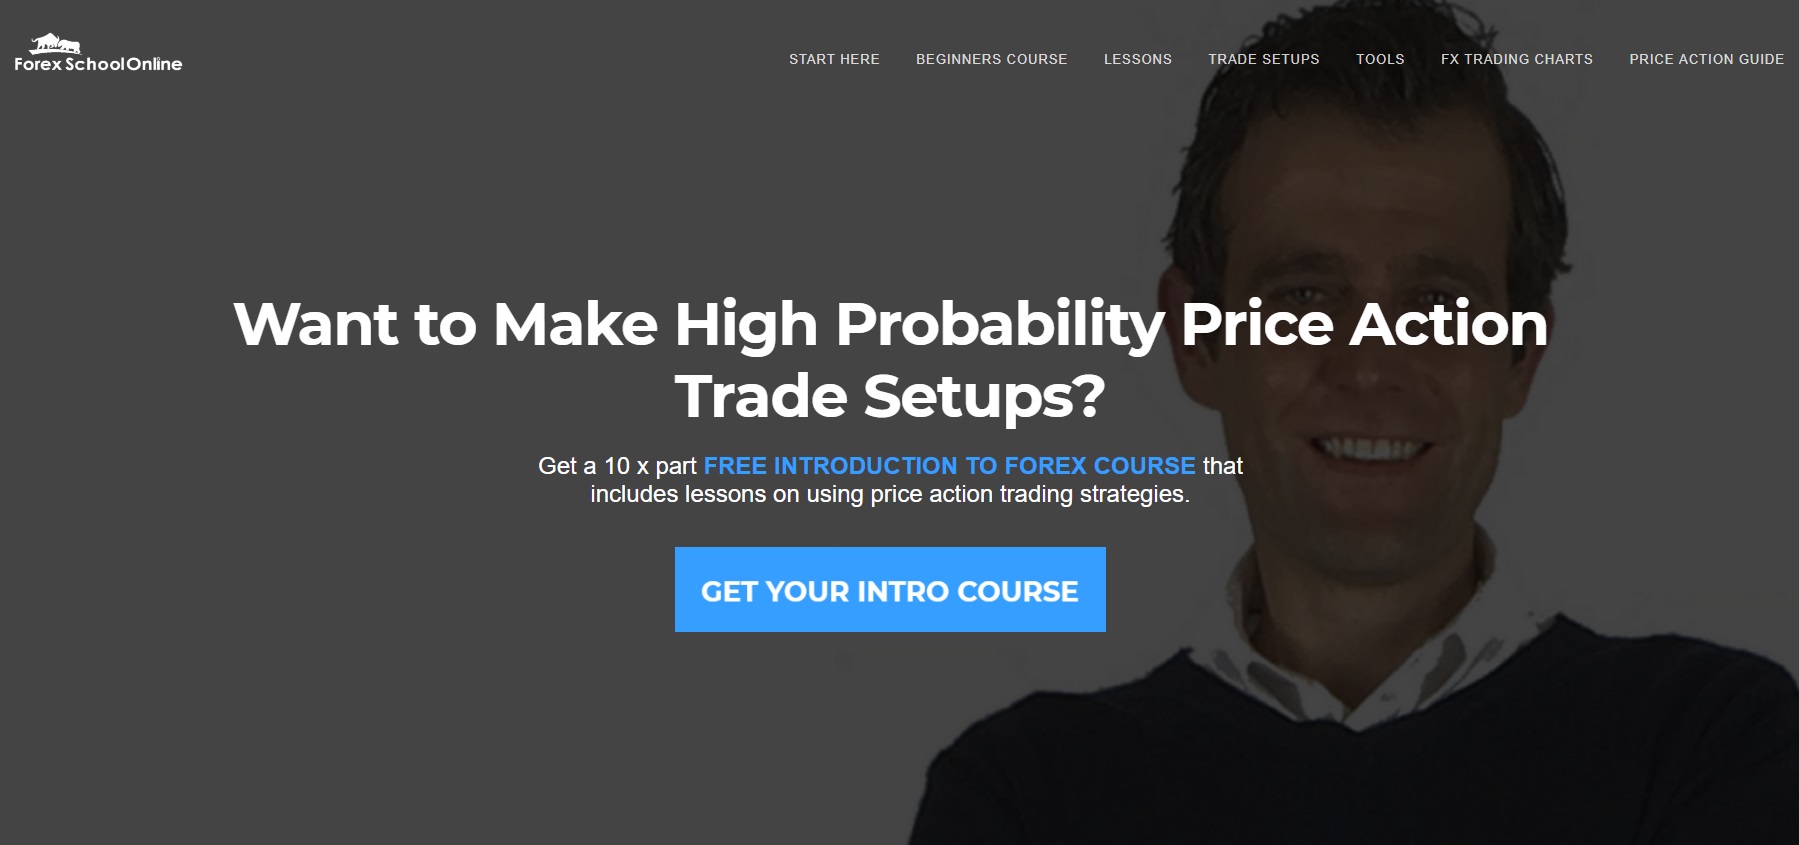 Forex School Online Review Trading Courses - 